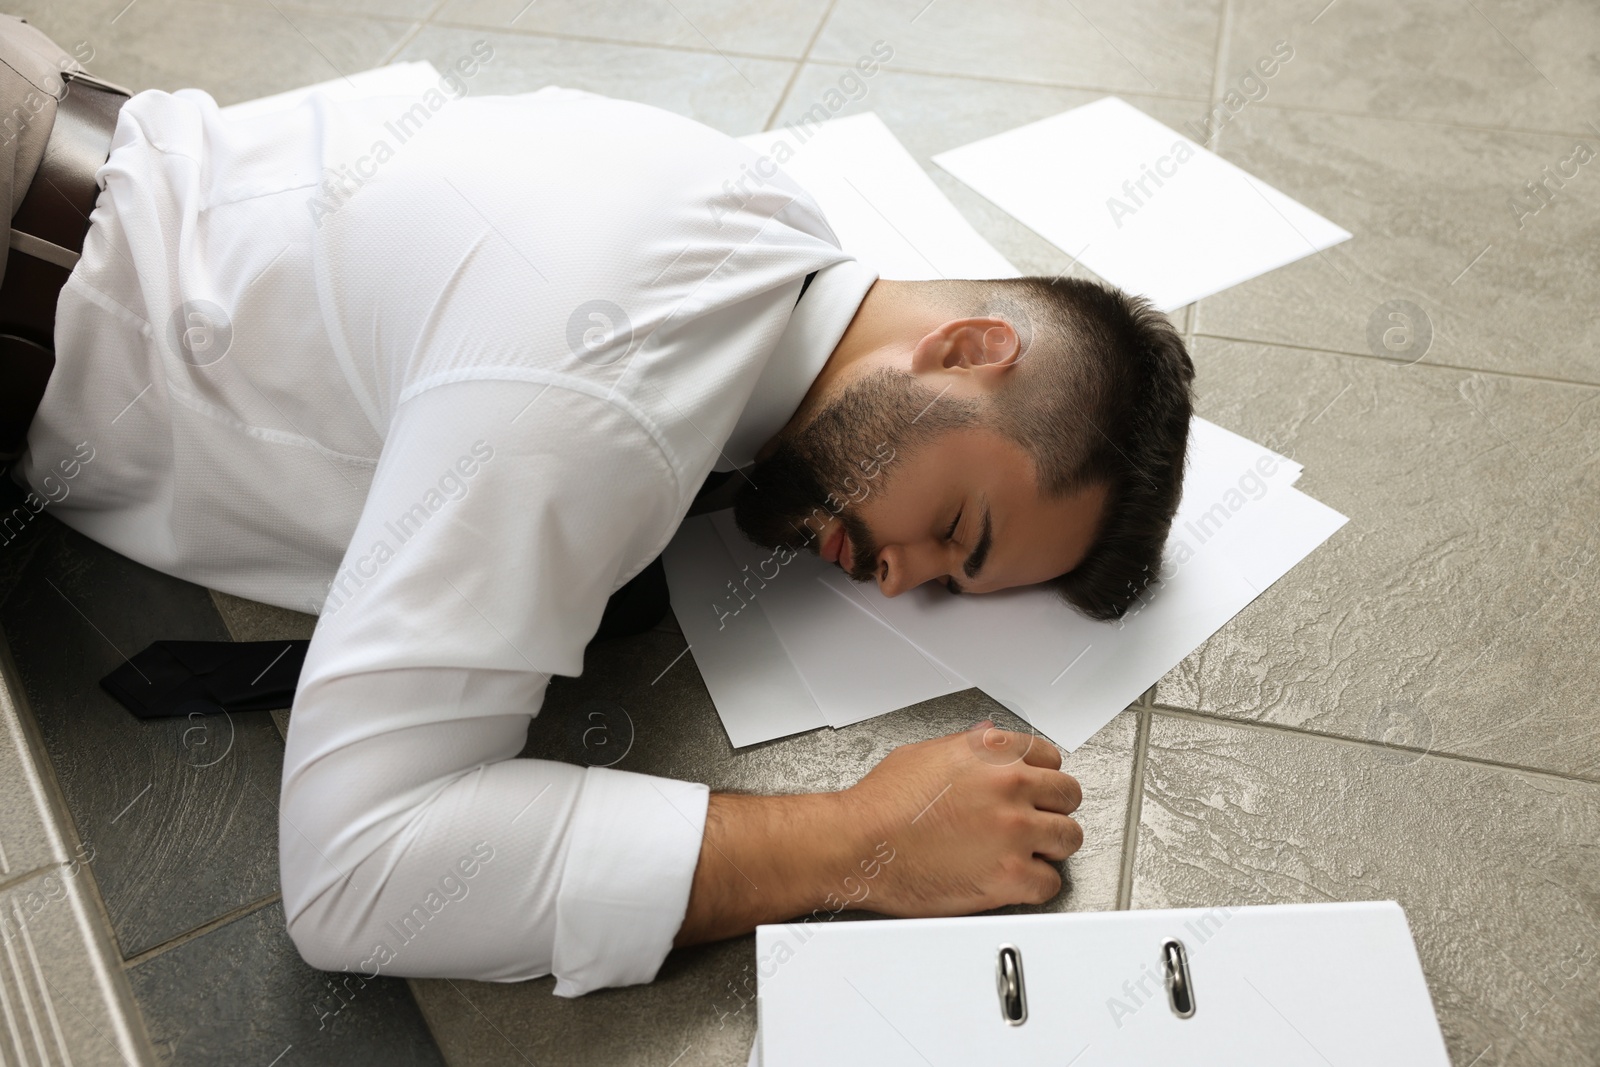 Photo of Unconscious man with scattered folder and papers lying on floor after falling down stairs indoors